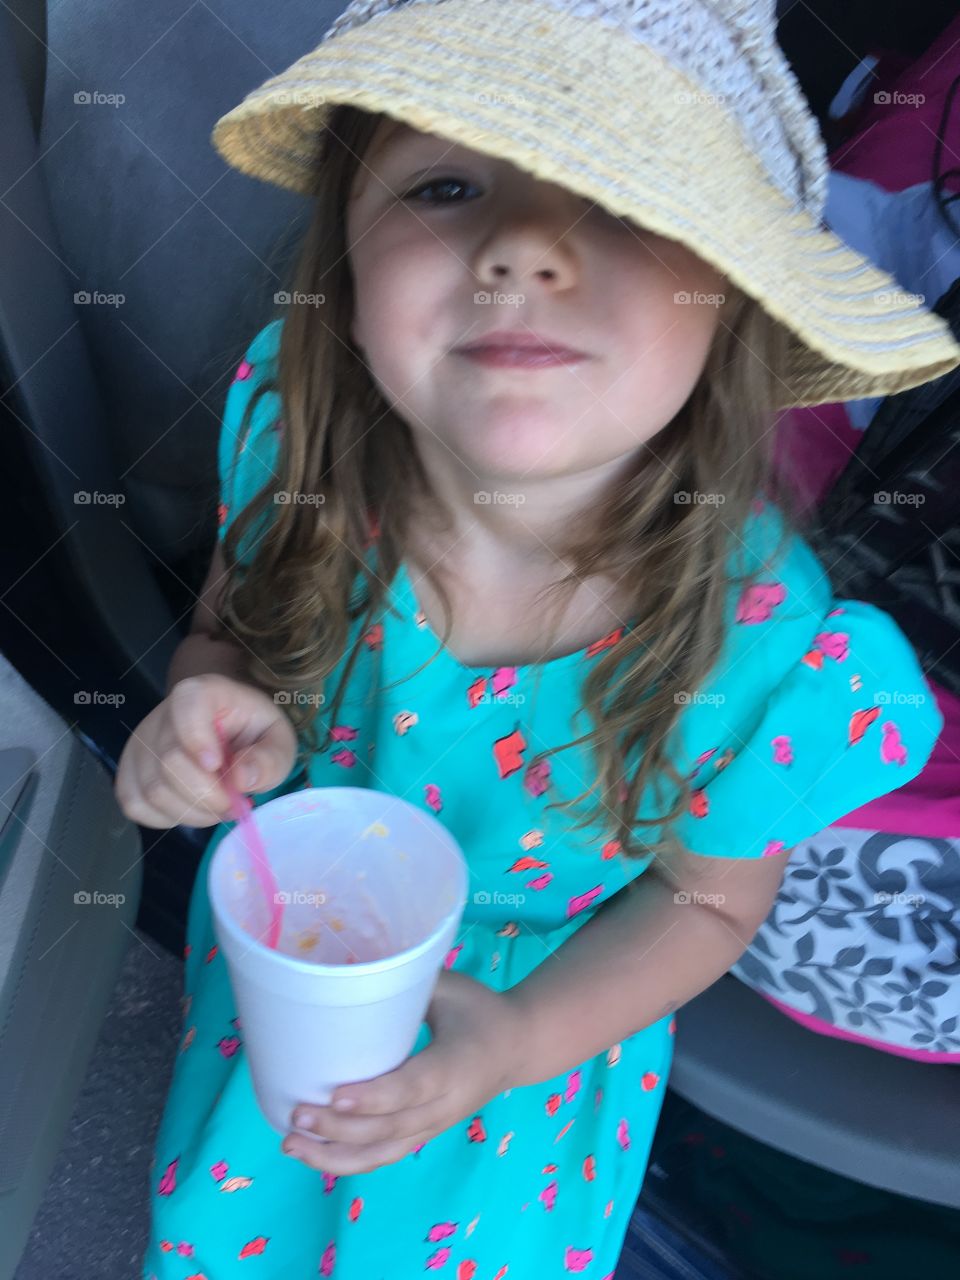 Staying cool in momma gardening cap